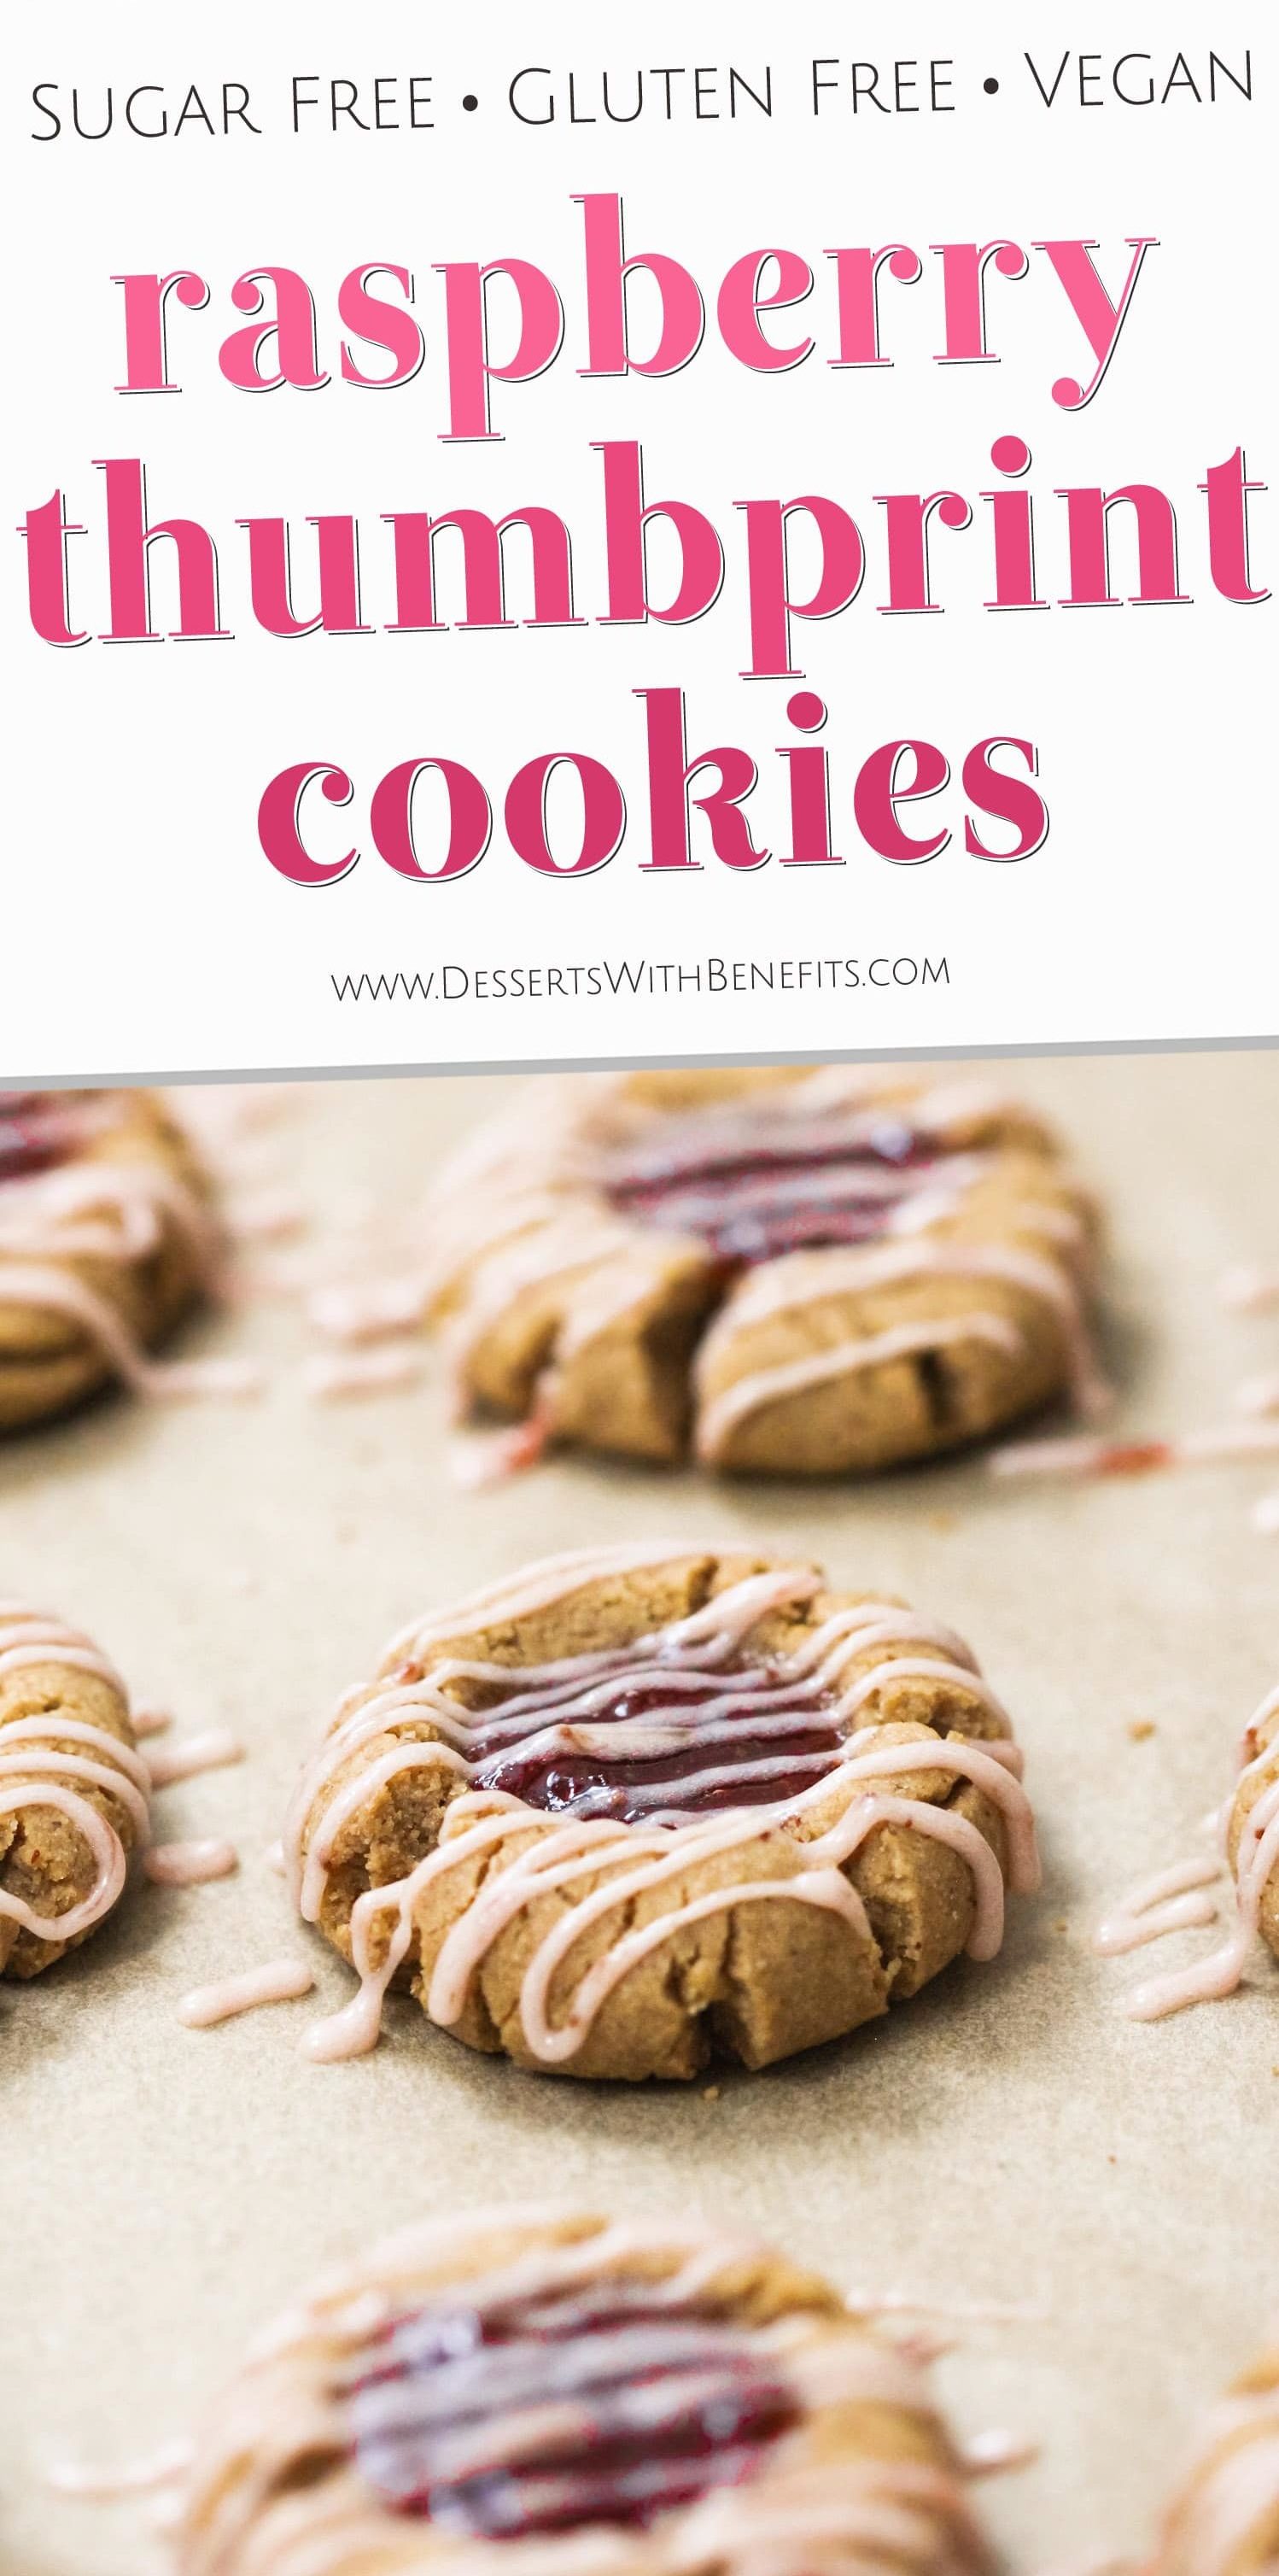 These Healthy Raspberry Thumbprint Cookies are so soft, chewy, and delicious (not to mention, easy to make!), you'd never know they're refined sugar free, gluten free, dairy free, and vegan too! Healthy Dessert Recipes with sugar free, low fat, gluten free, and vegan options at the Desserts With Benefits Blog (www.DessertsWithBenefits.com)